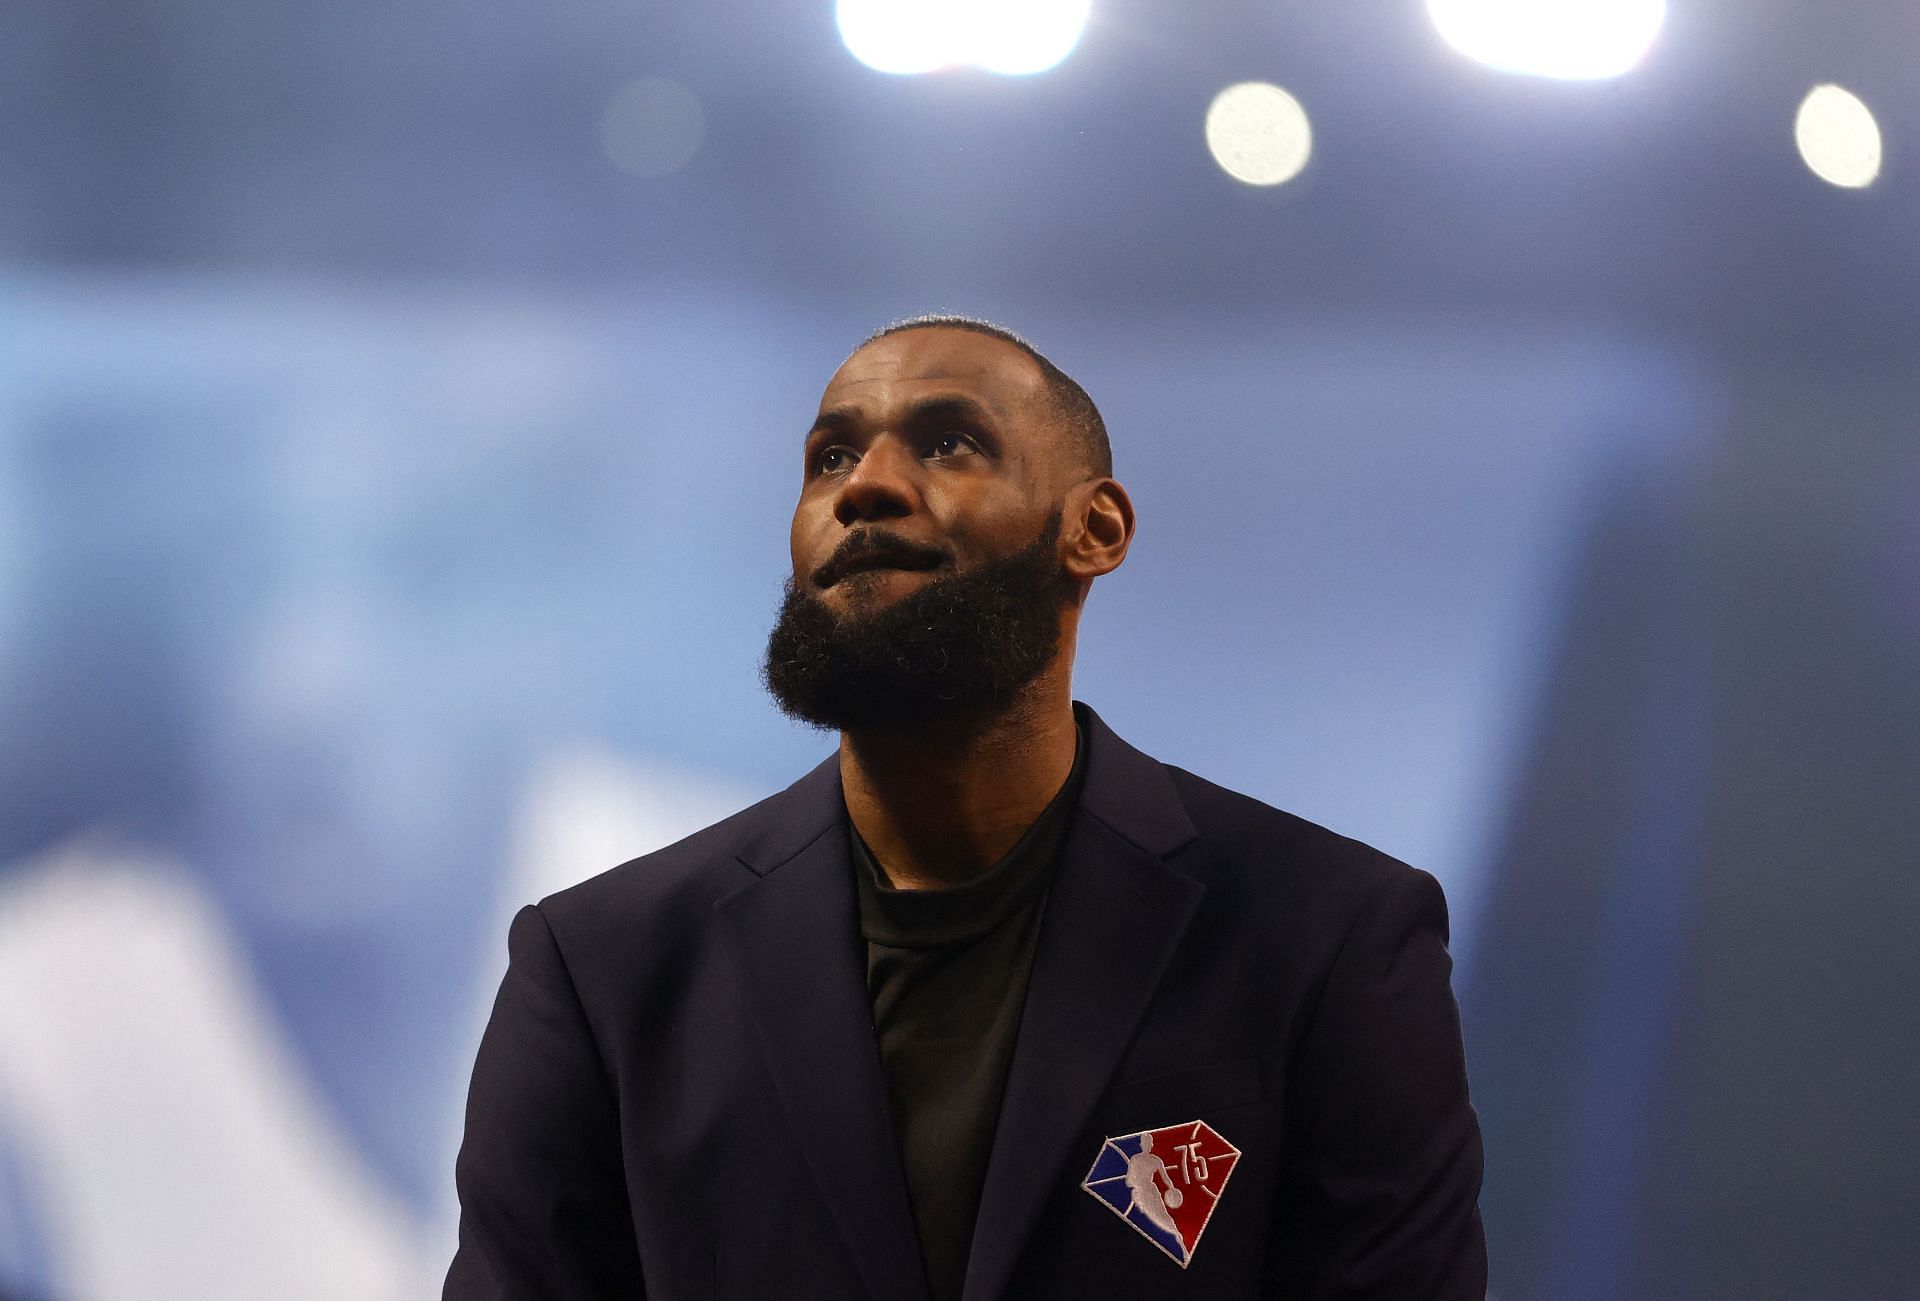 LeBron James at the 2022 All-Star Game